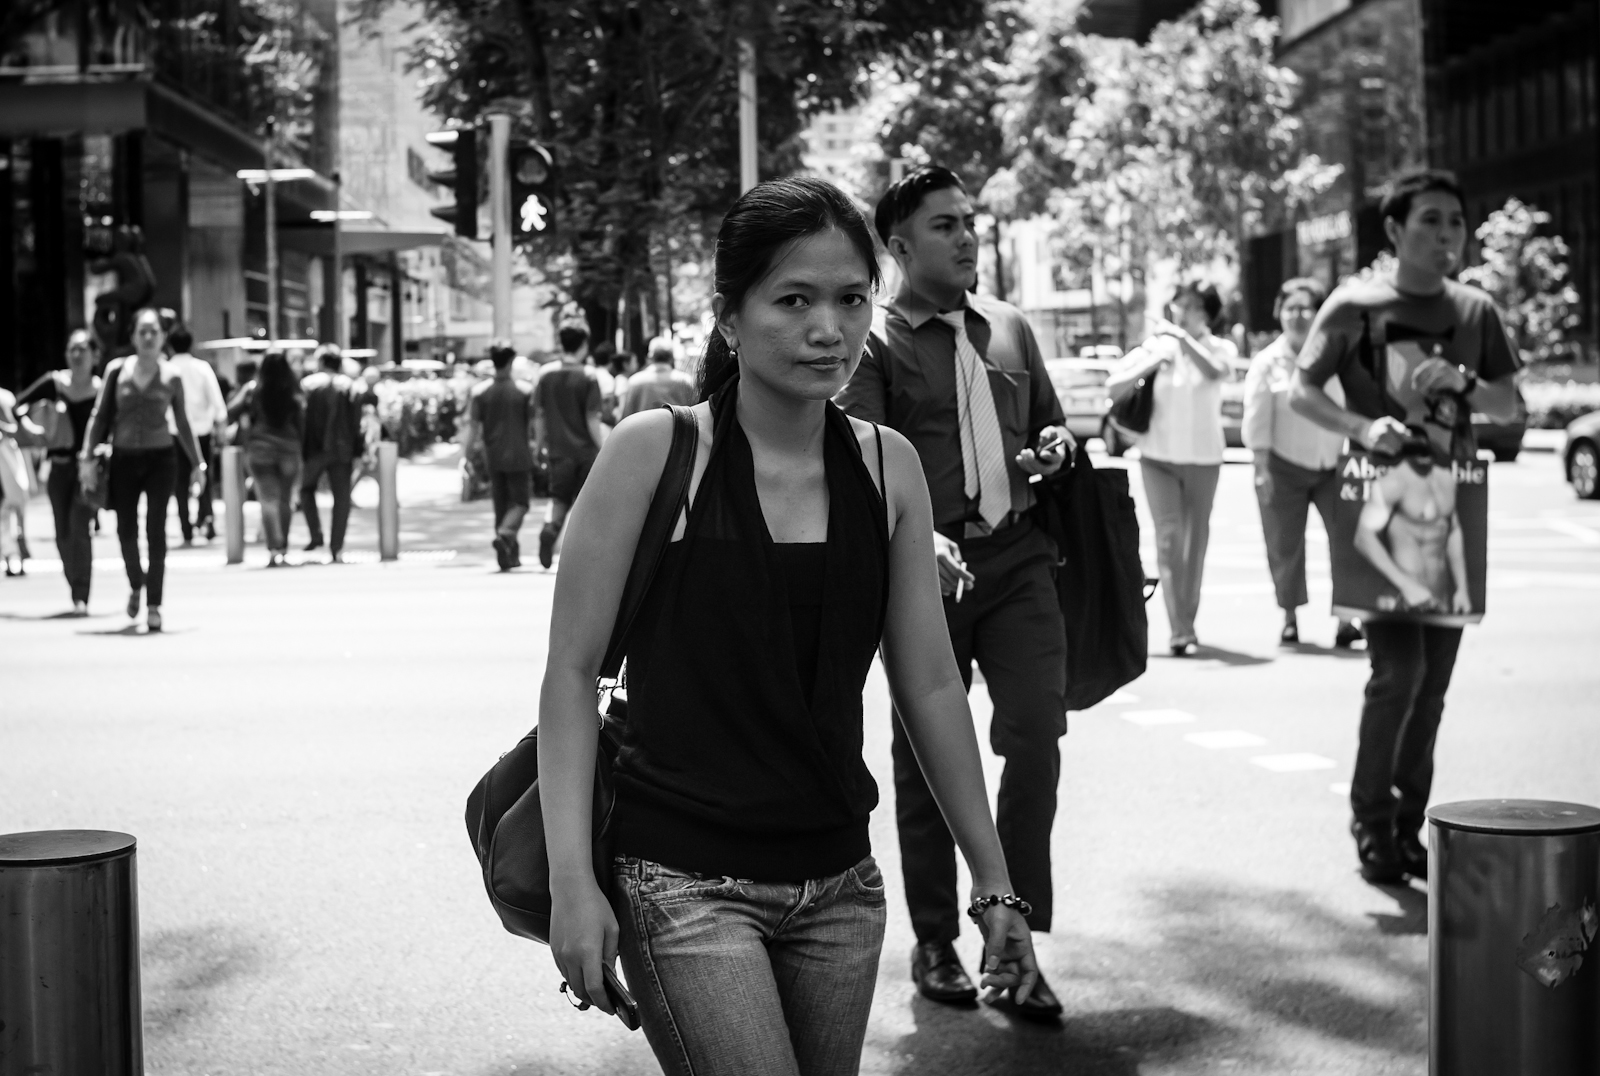 Street photography - passer-by looking at the camera